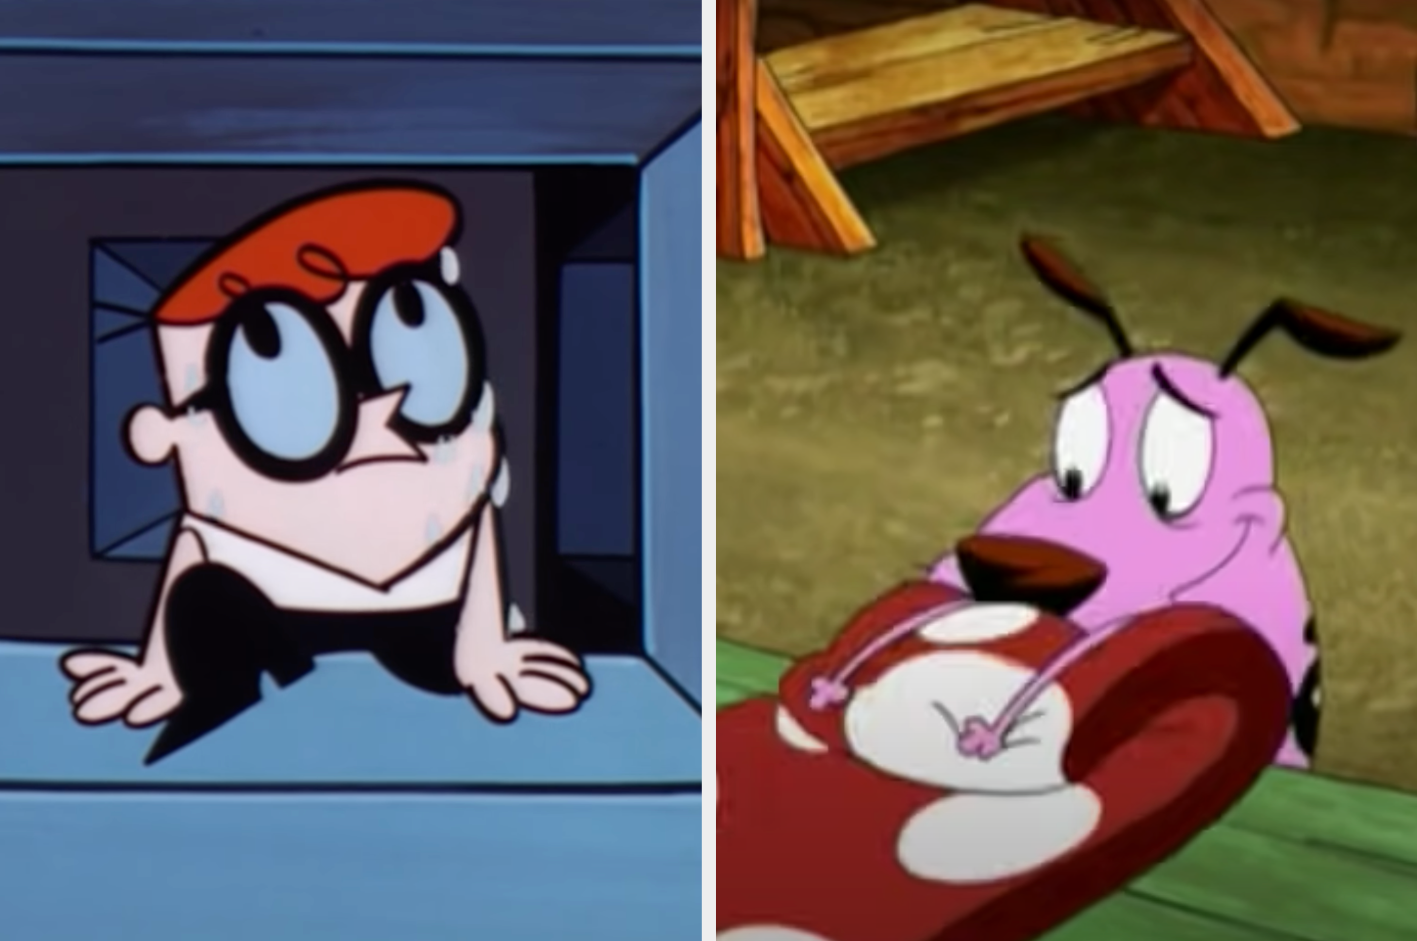 Stills from Dexter&#x27;s Laboratory and Courage the Cowardly Dog.